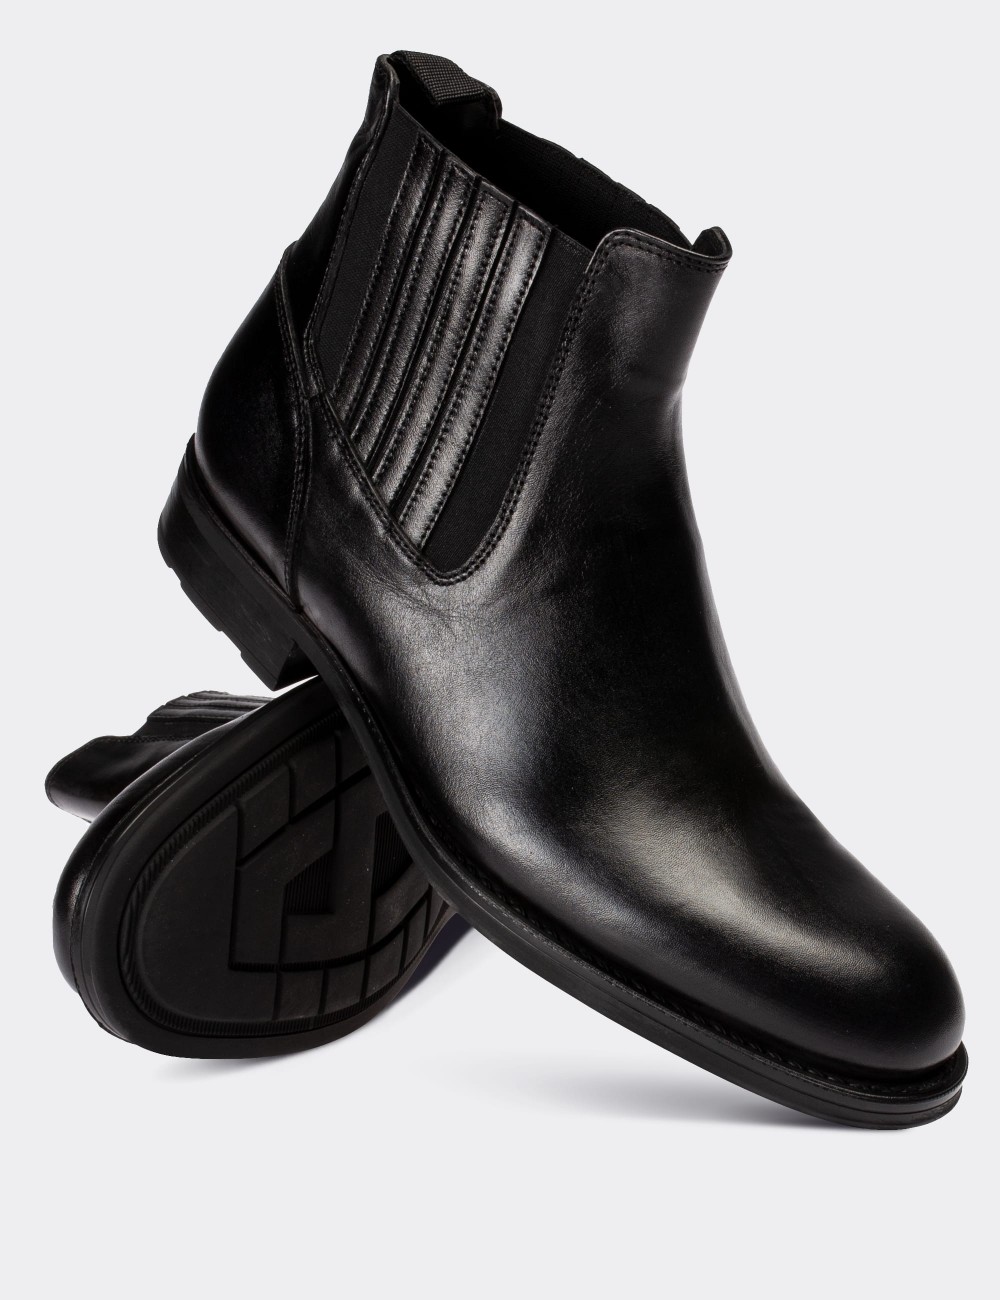 Black  Leather Chelsea Boots - 01748MSYHC02